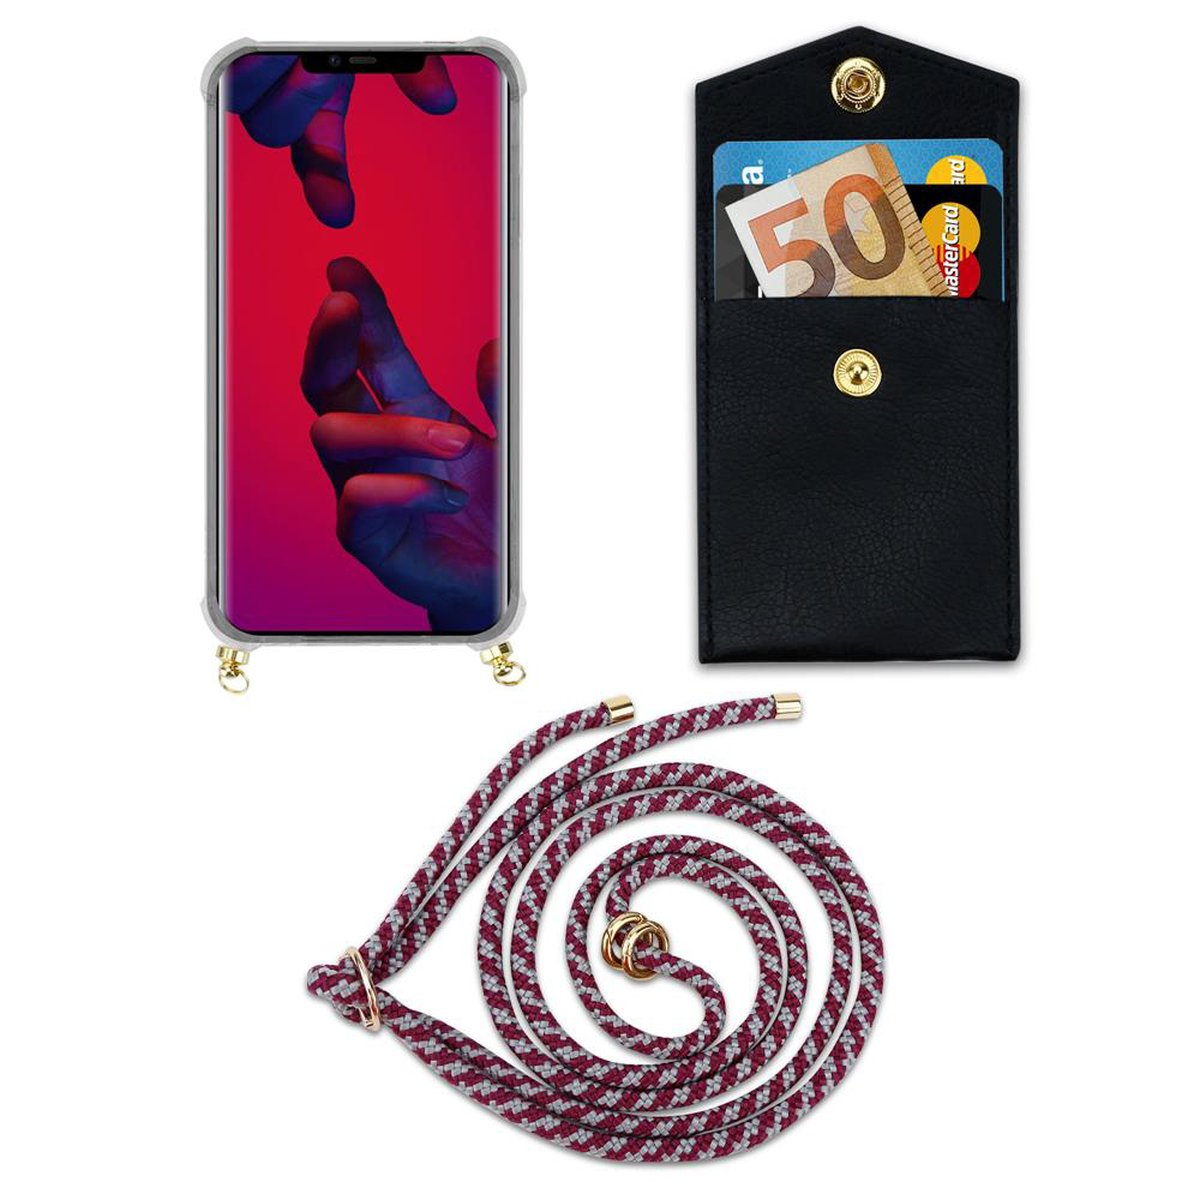 CADORABO Handy abnehmbarer und WEIß mit Kette Ringen, PRO, ROT MATE 20 Kordel Hülle, Backcover, Band Gold Huawei